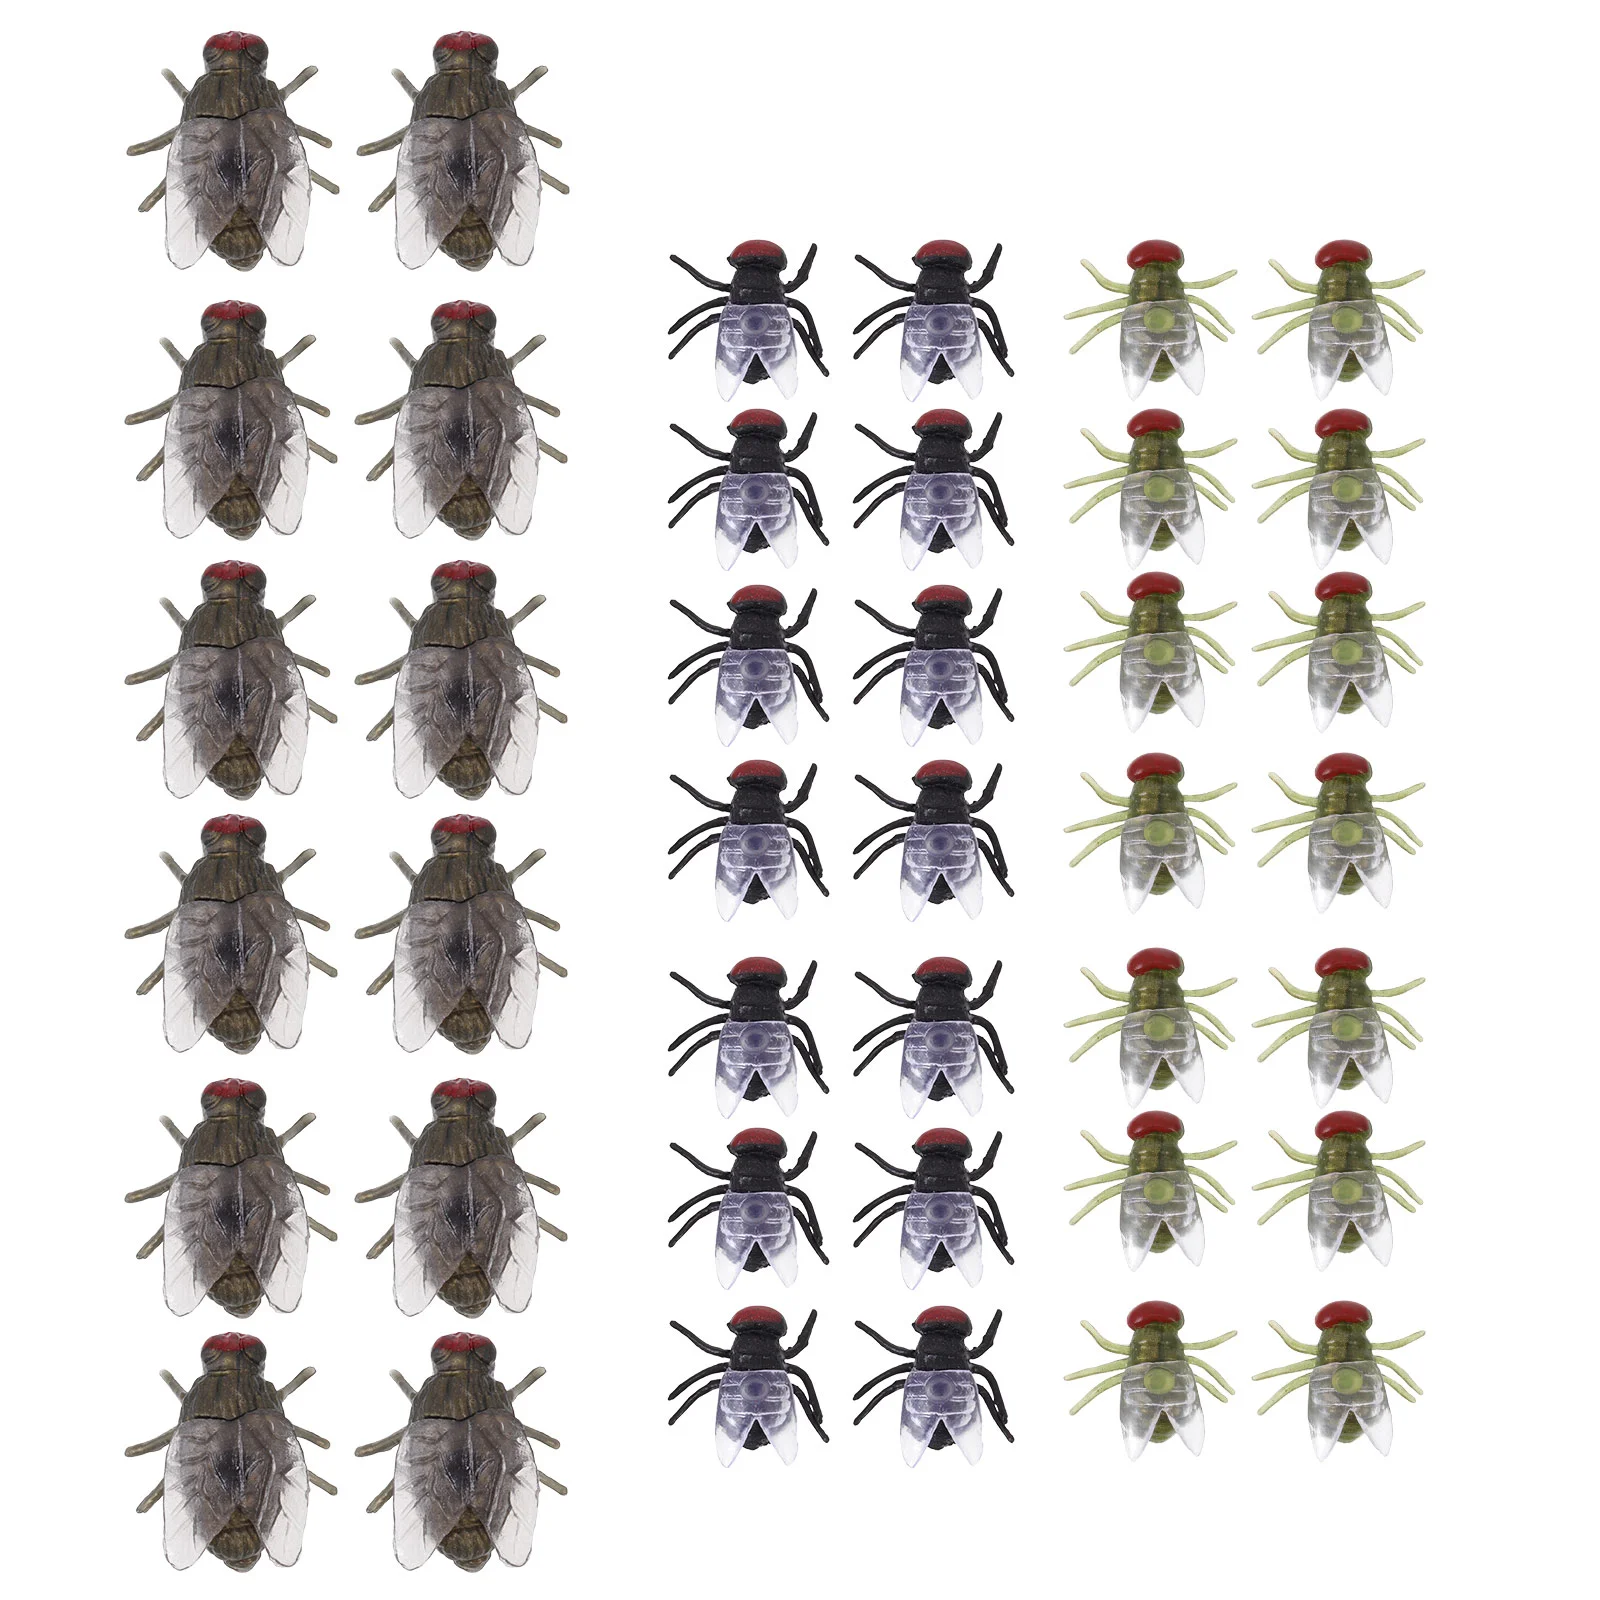 

Fly Model Fake Flies Ants Plastic Black Blowfly Insect Tricky Props Halloween Artificial Spoof Toys Prank Insects